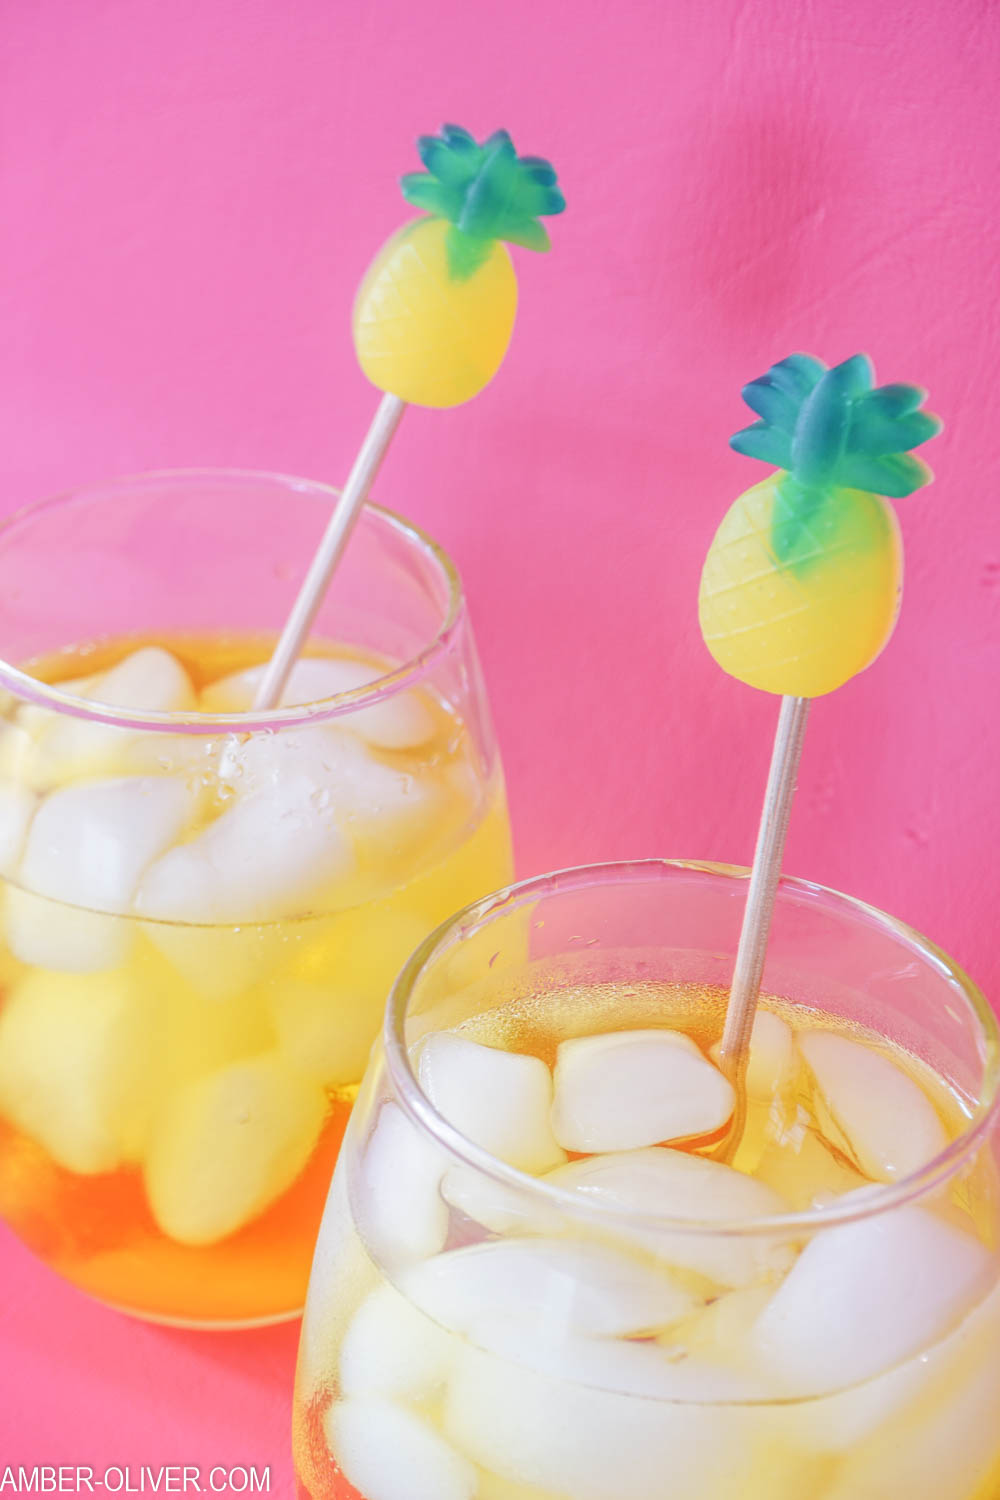 30 DIY Ways to Decorate Your Drink Stirrers • Cool Crafts